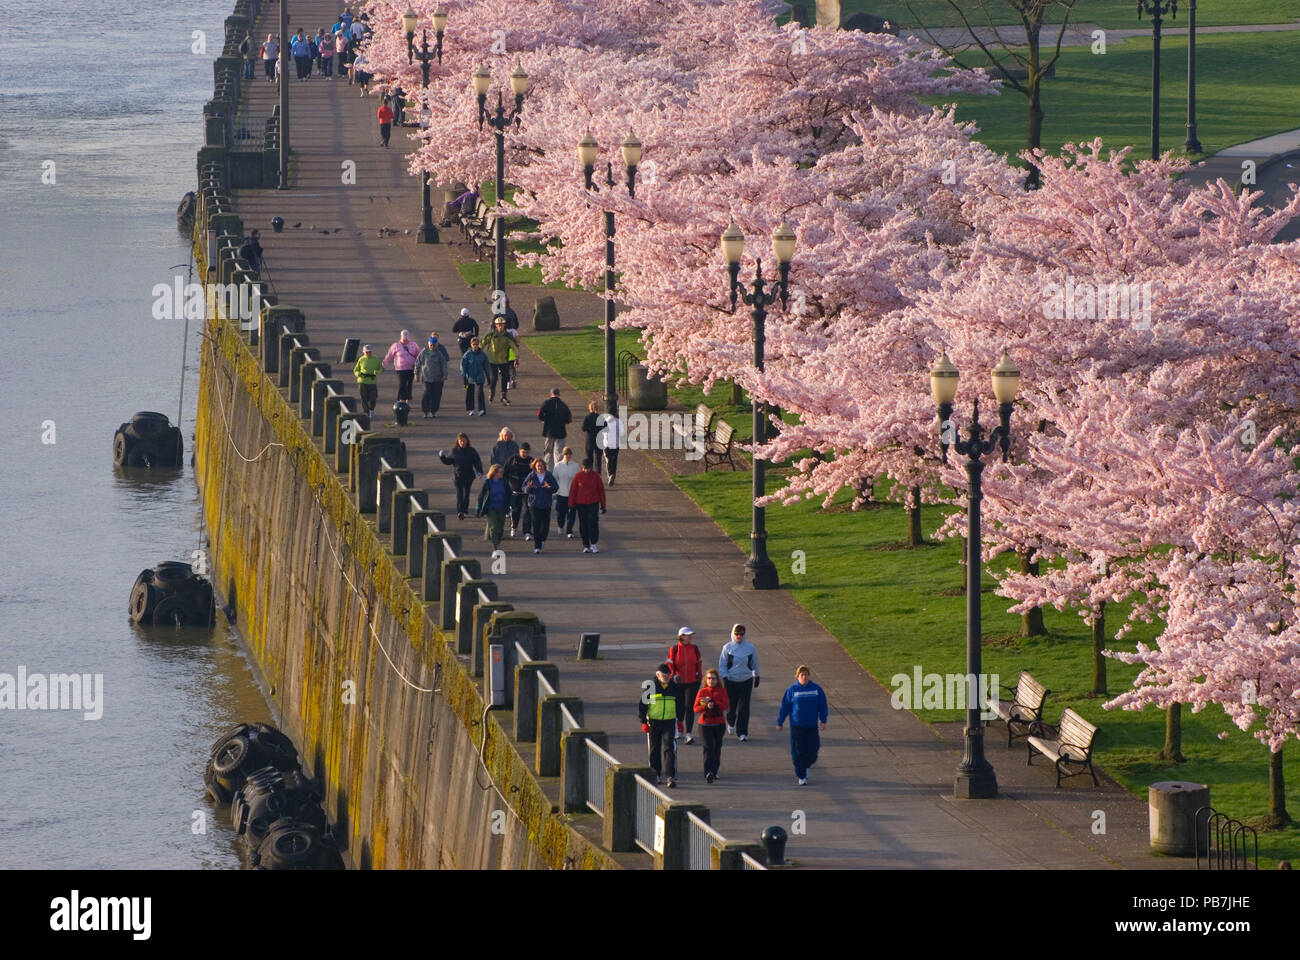 Waterfront walkway with decorative cherry trees from Steele Bridge, Tom McCall Waterfront Park, Portland, Oregon Stock Photo